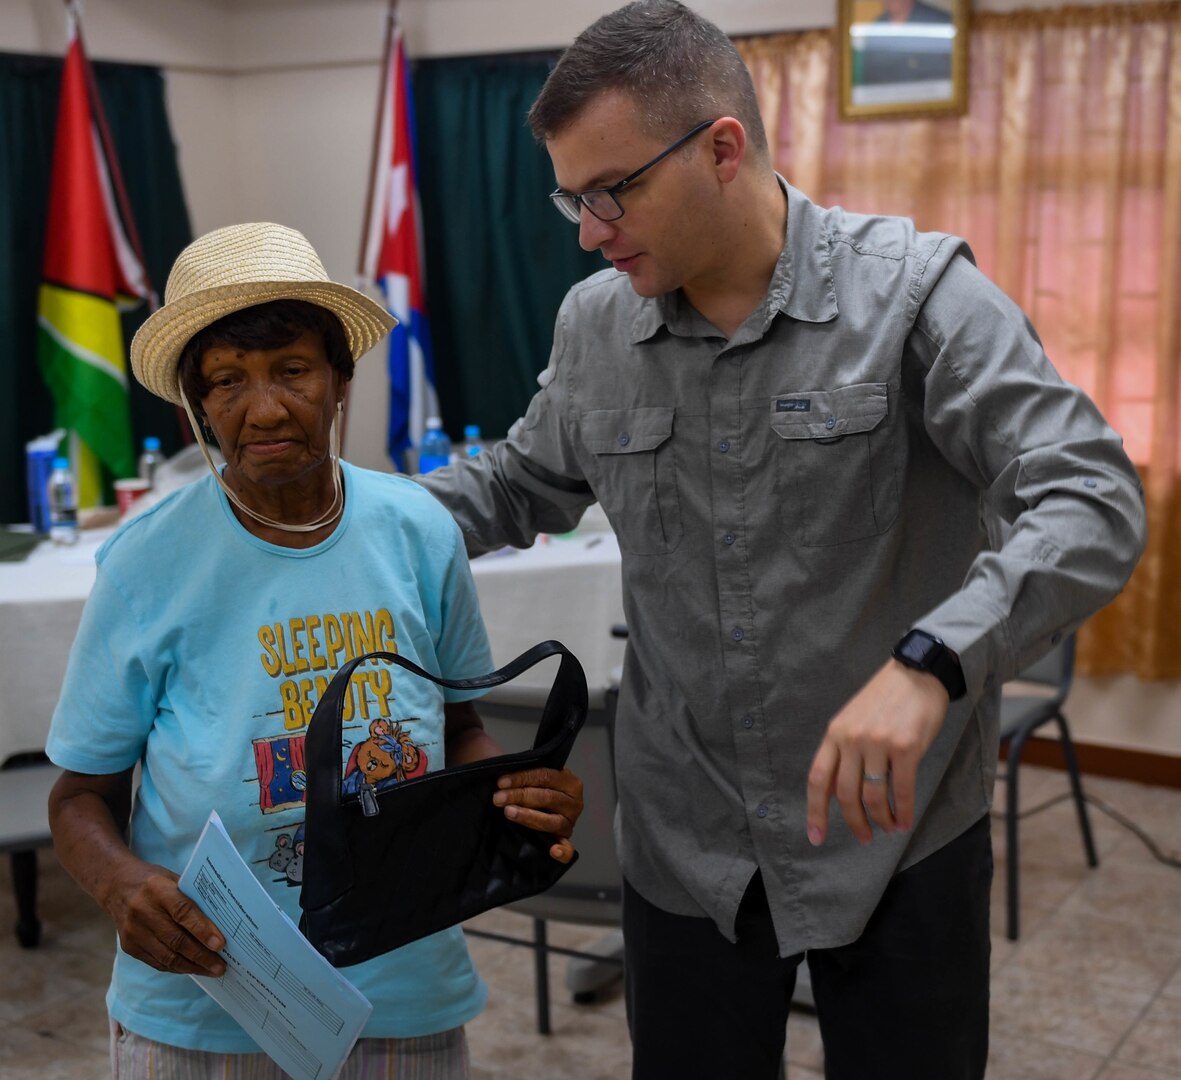 Air Force Maj. Andrew Lewis, ophthalmologist from Joint Base San Antonio-Lackland, guides a Guyanese patient to the next examine station during New Horizons 2019, Port Mourant, Guyana, May 3, 2019. The New Horizons exercise 2019 provides U.S. military members an opportunity to train for an overseas deployment and the logistical requirements it entails. The exercise promotes bilateral cooperation by providing opportunities for U.S. and partner nation military engineers, medical personnel and support staff to work and train side by side.